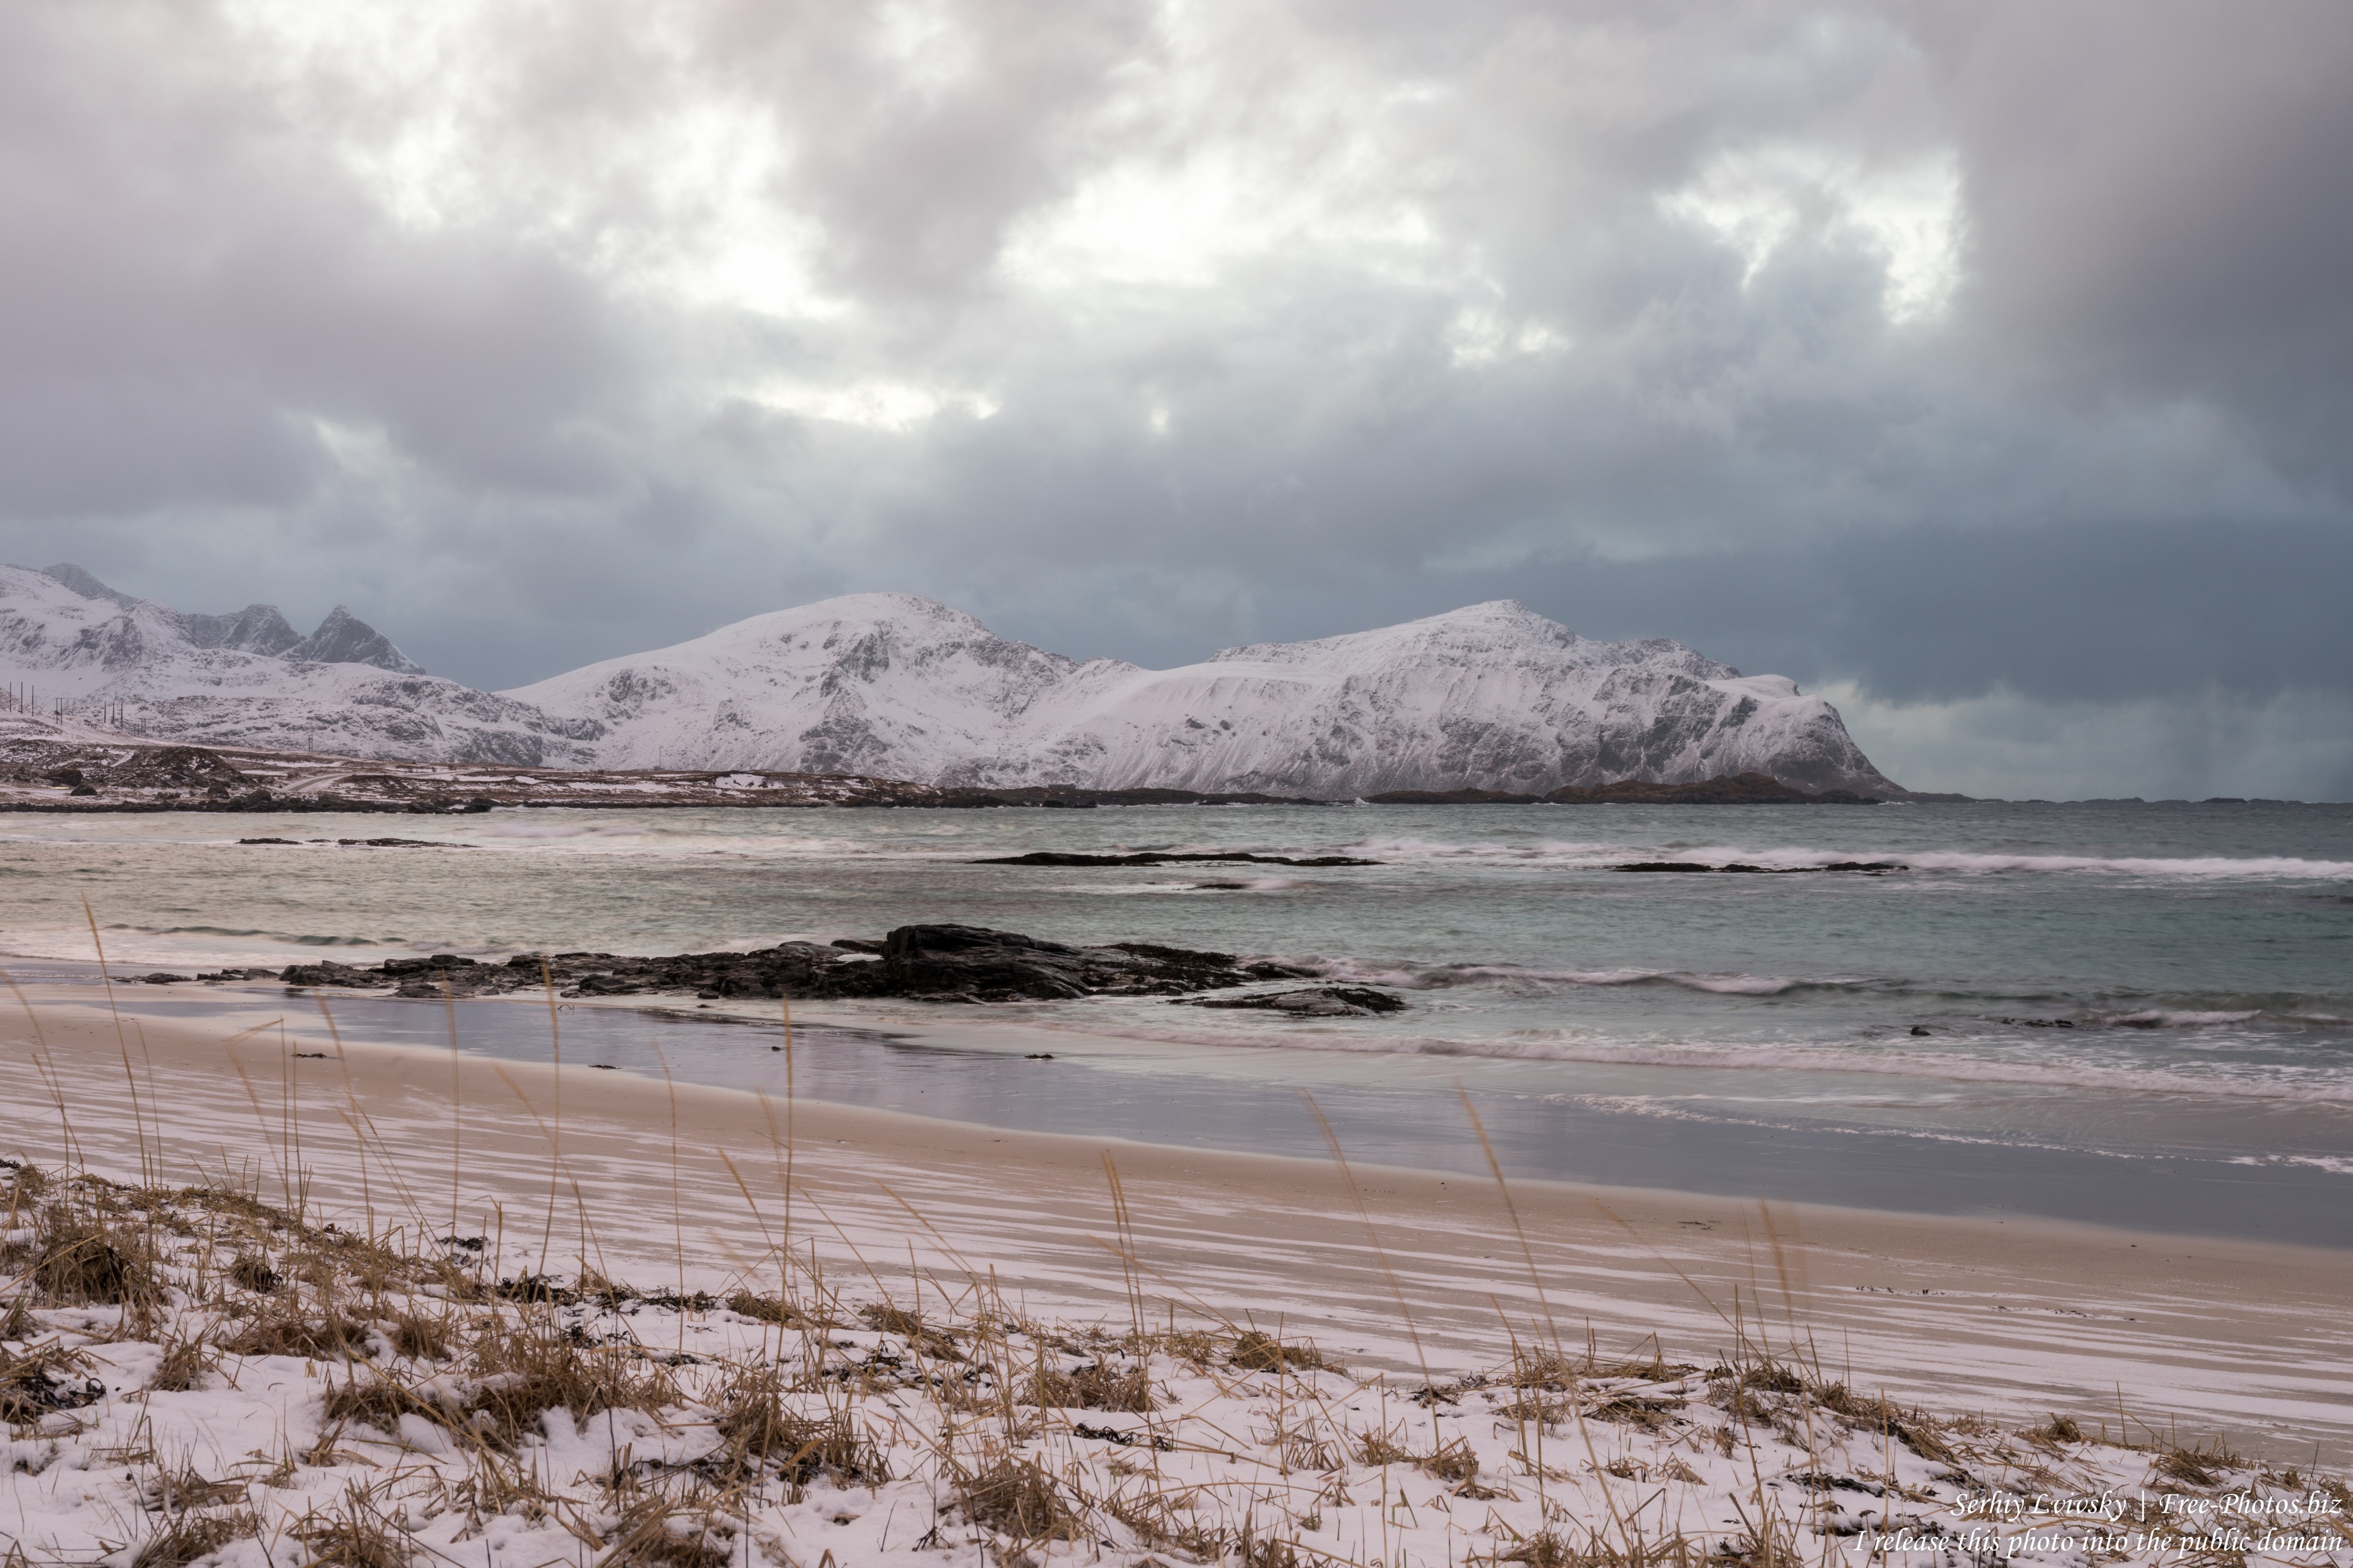 Skagsanden beach, Norway, photographed in February 2020 by Serhiy Lvivsky, picture 9